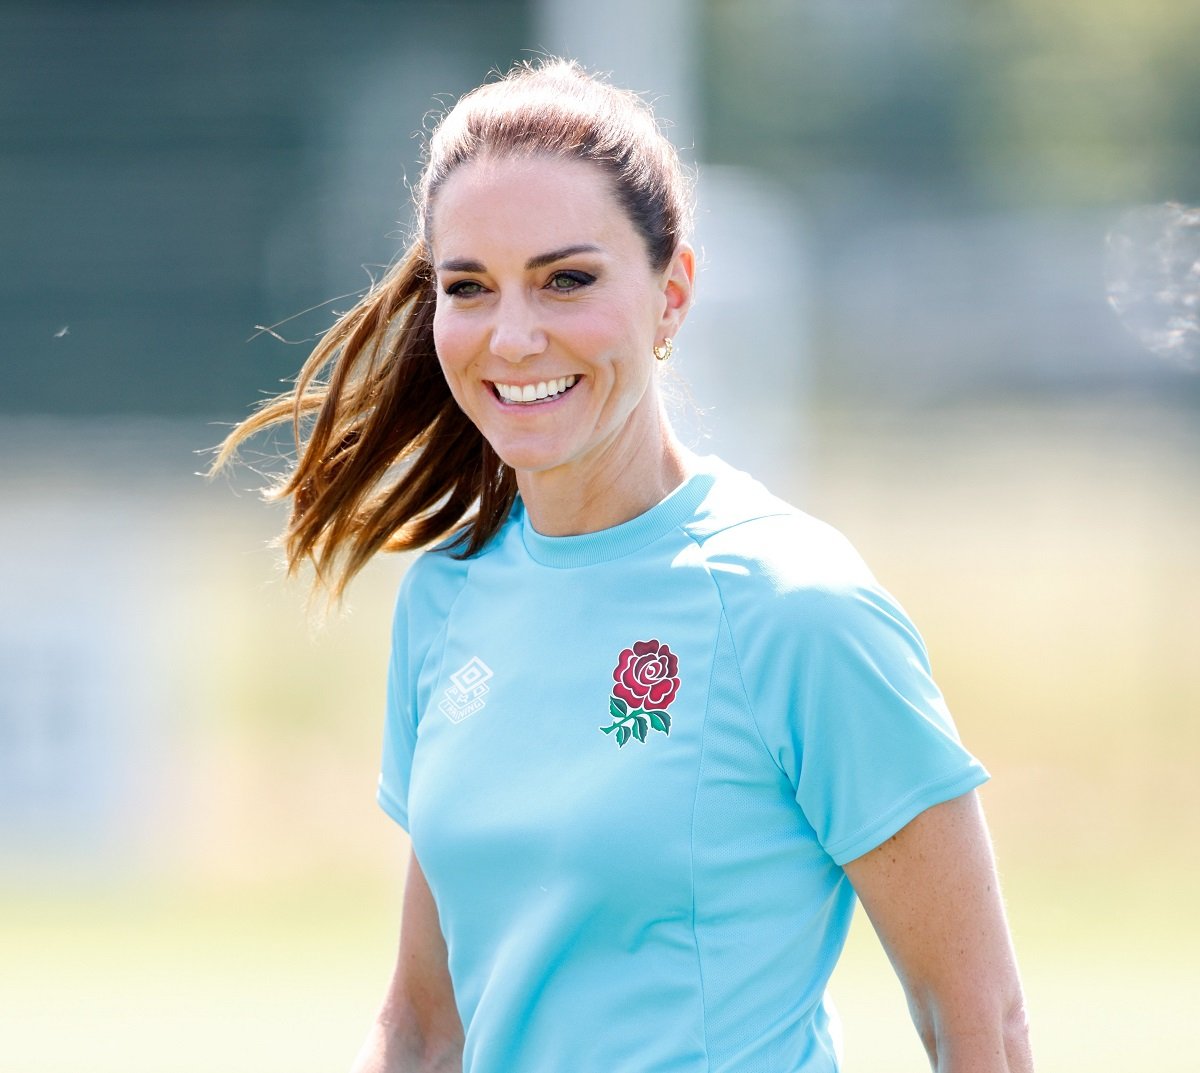 Kate Middleton takes part in a game of walking touch rugby as she visits Maidenhead Rugby Club